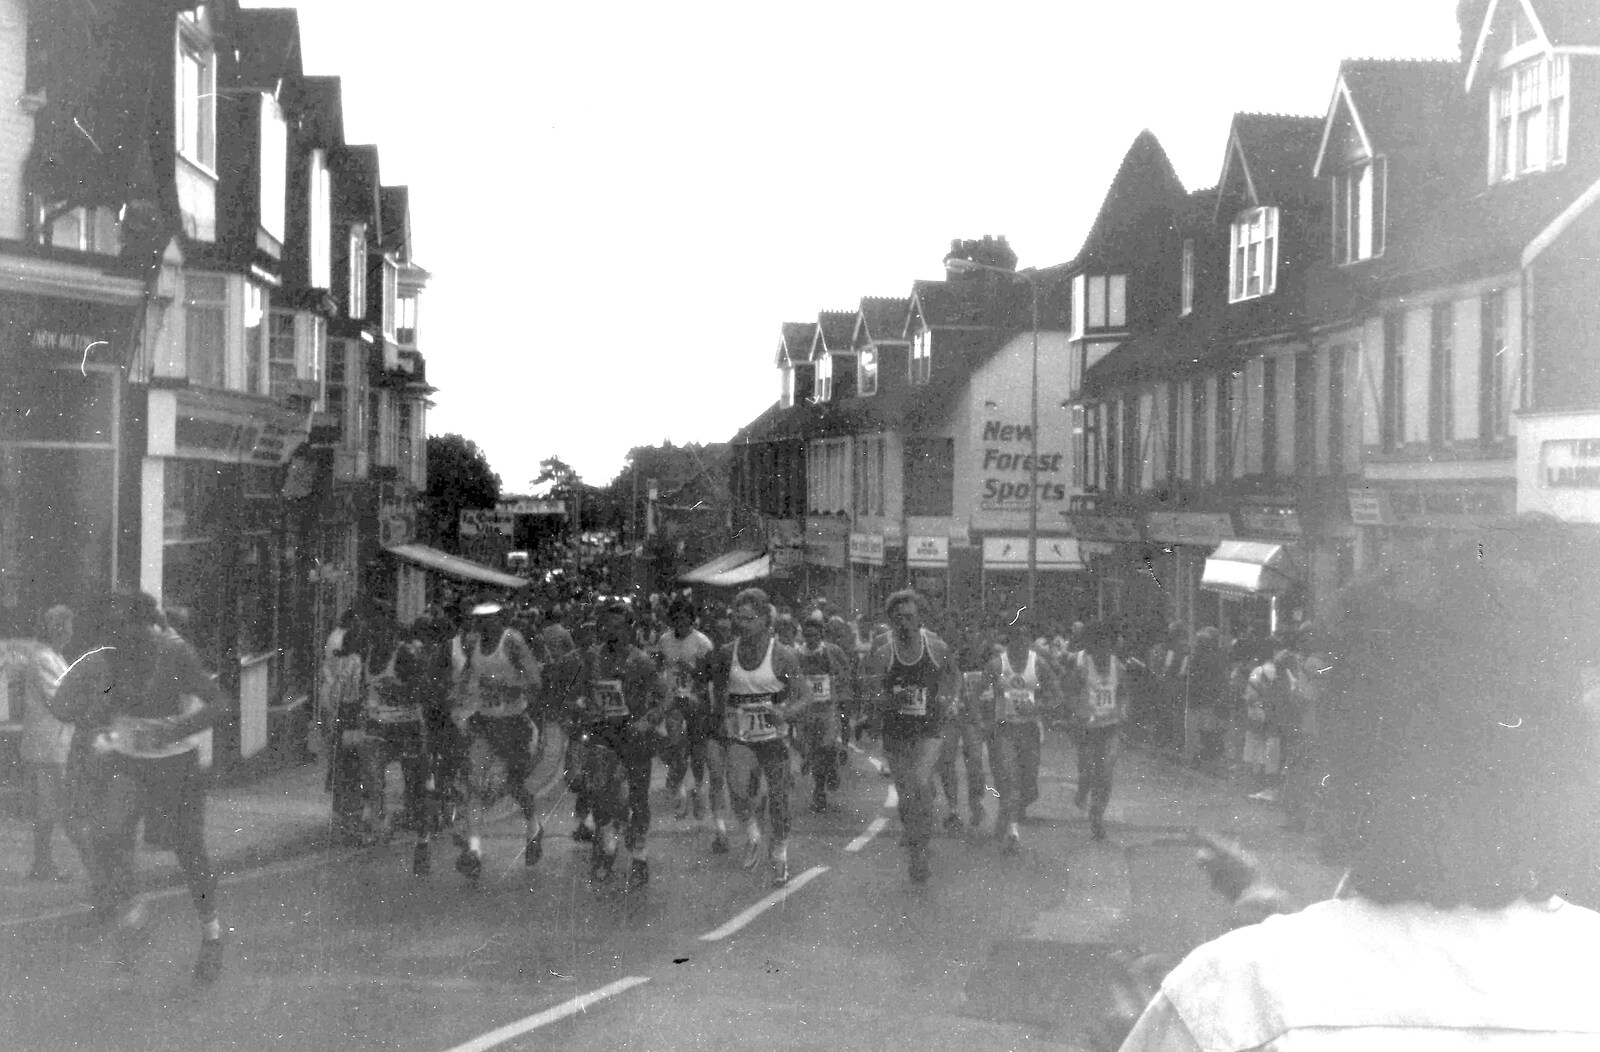 Marathon runners on Station Road in New Milton from The New Forest Marathon and Other Randomness, New Milton, Hampshire - 15th September 1985